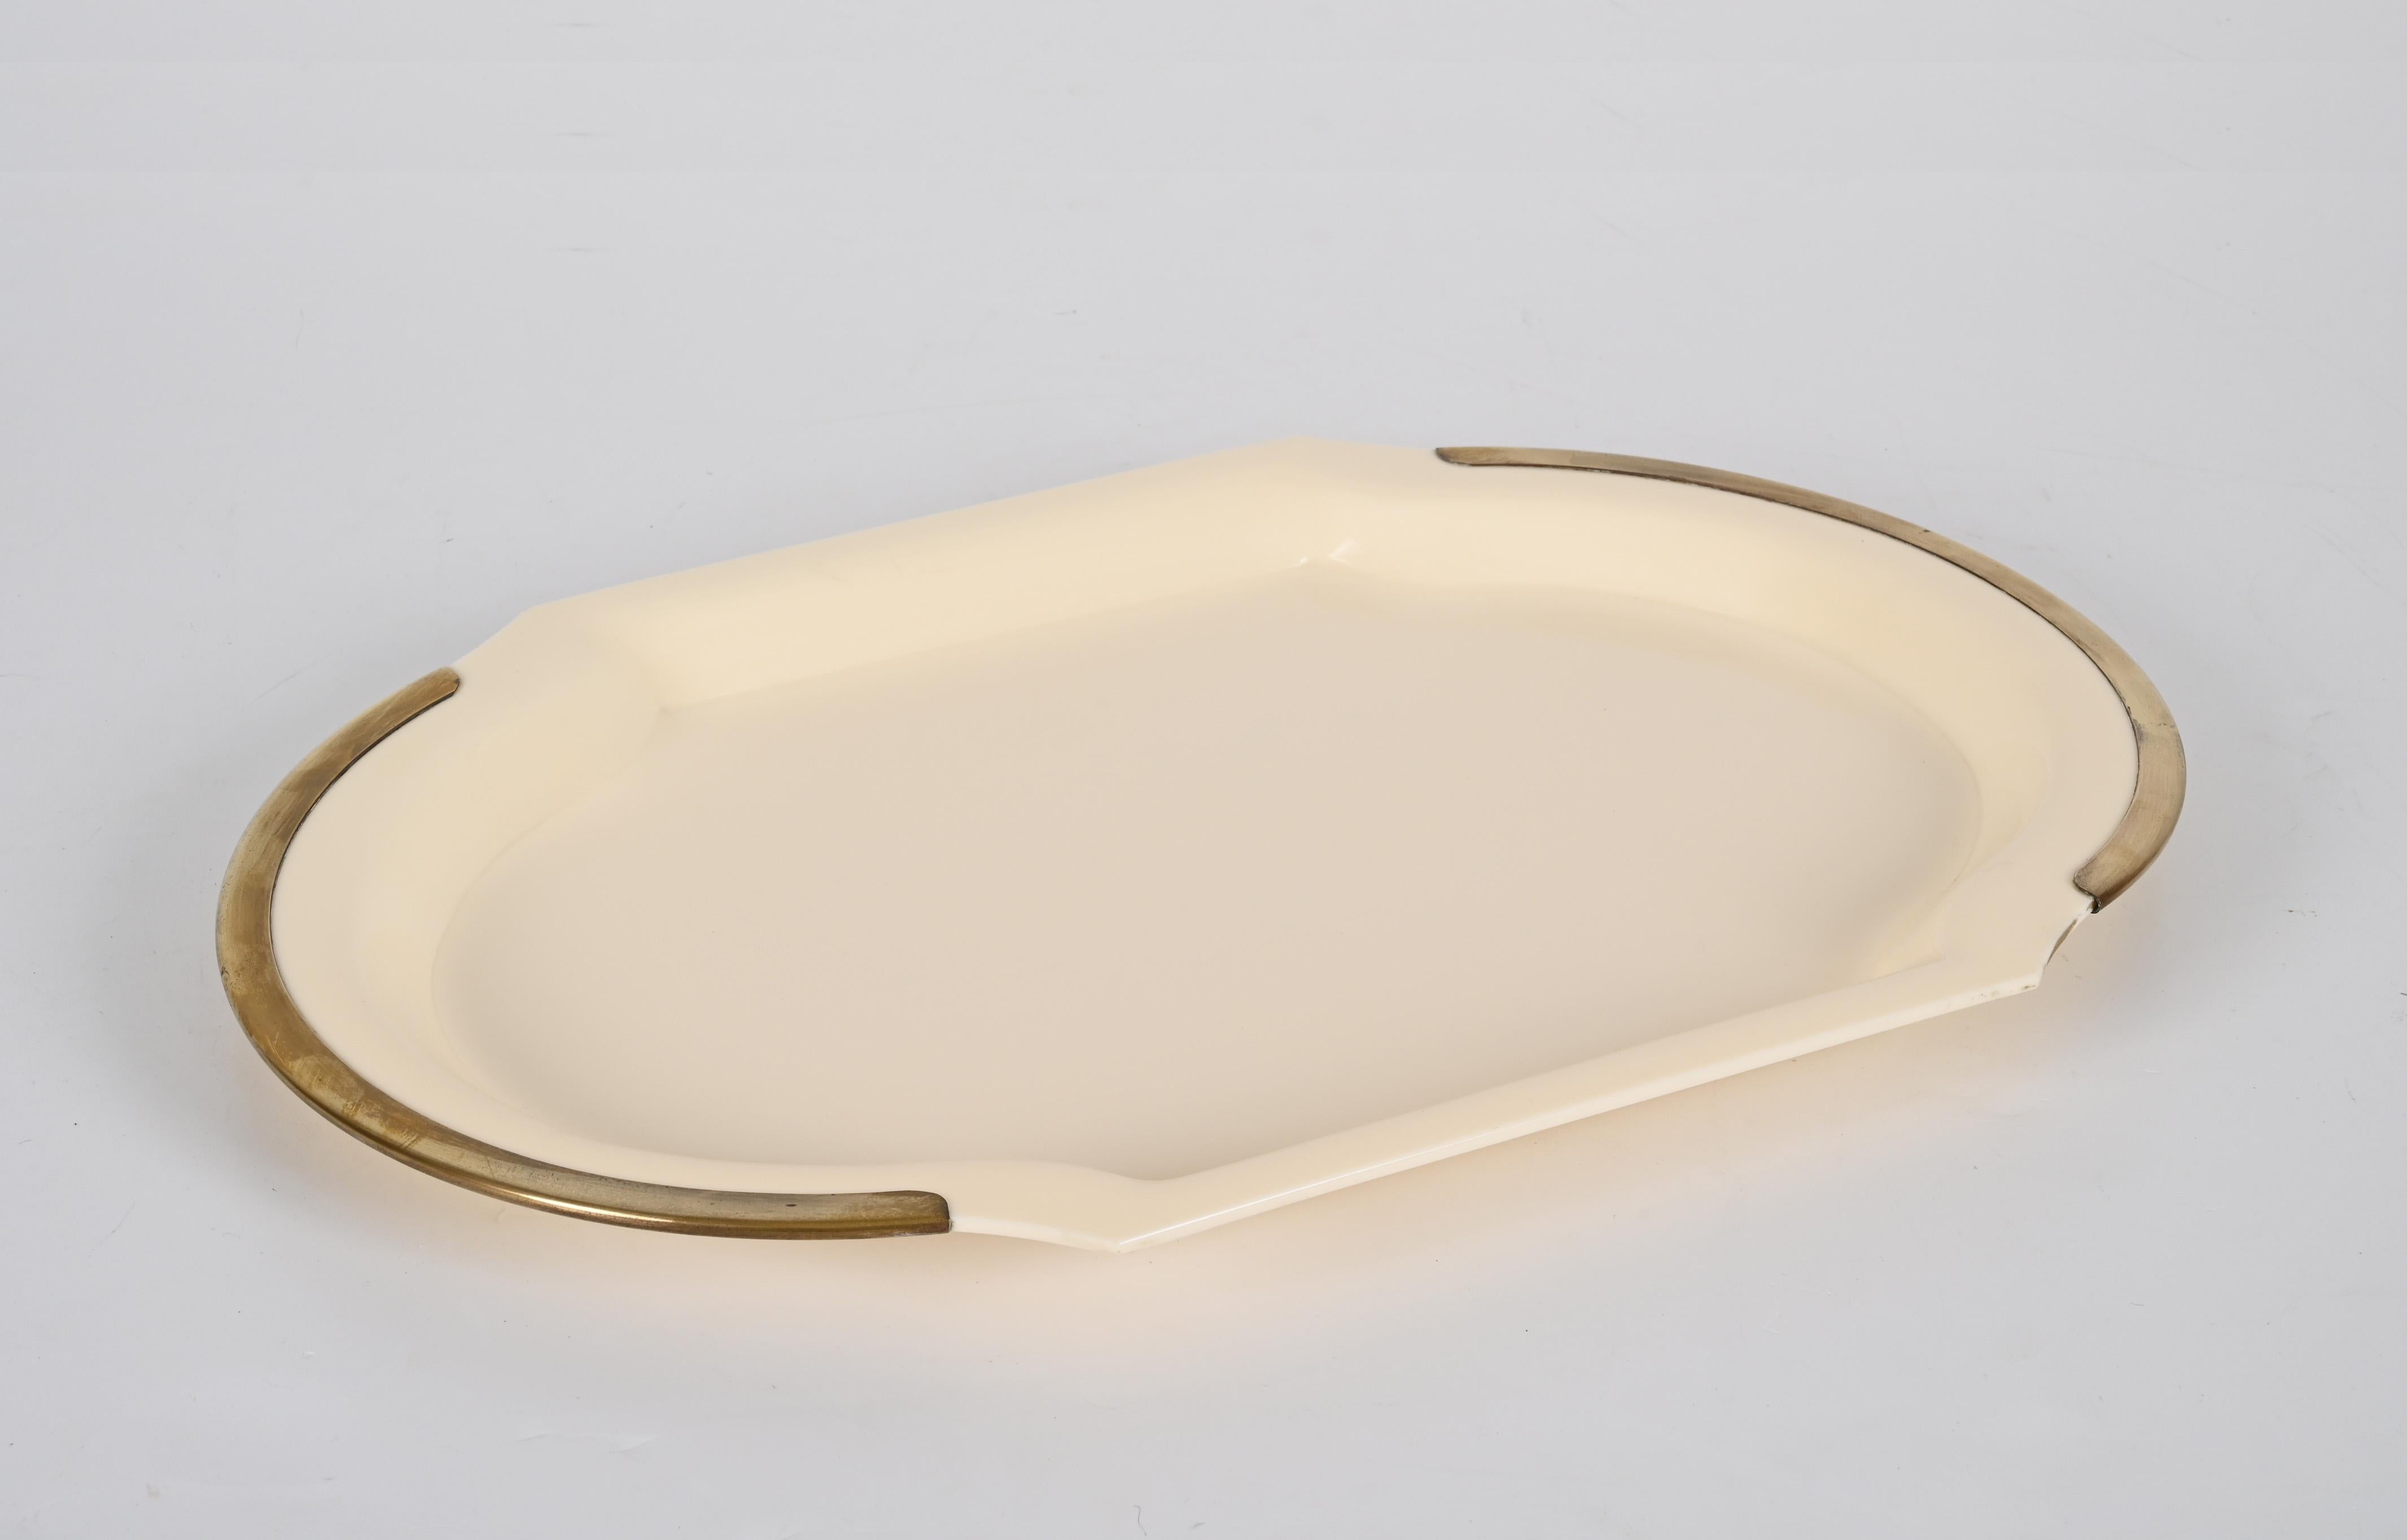 Italian Mid-Century Oval Serving Tray in Brass and Cream-Colored Plexiglass, Italy 1980s For Sale